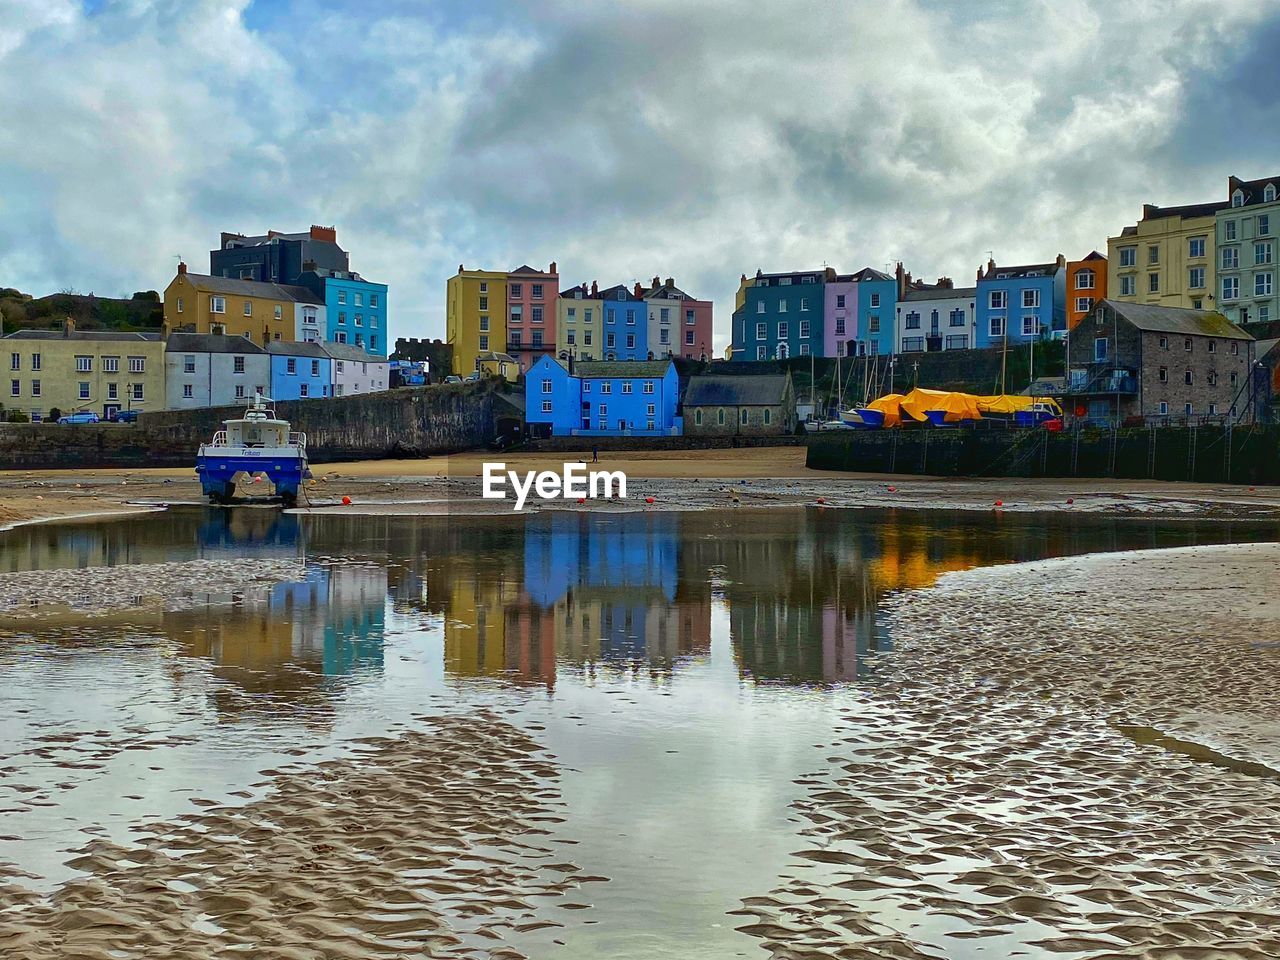 Tenby harbour with houses reflected in the pool of water.